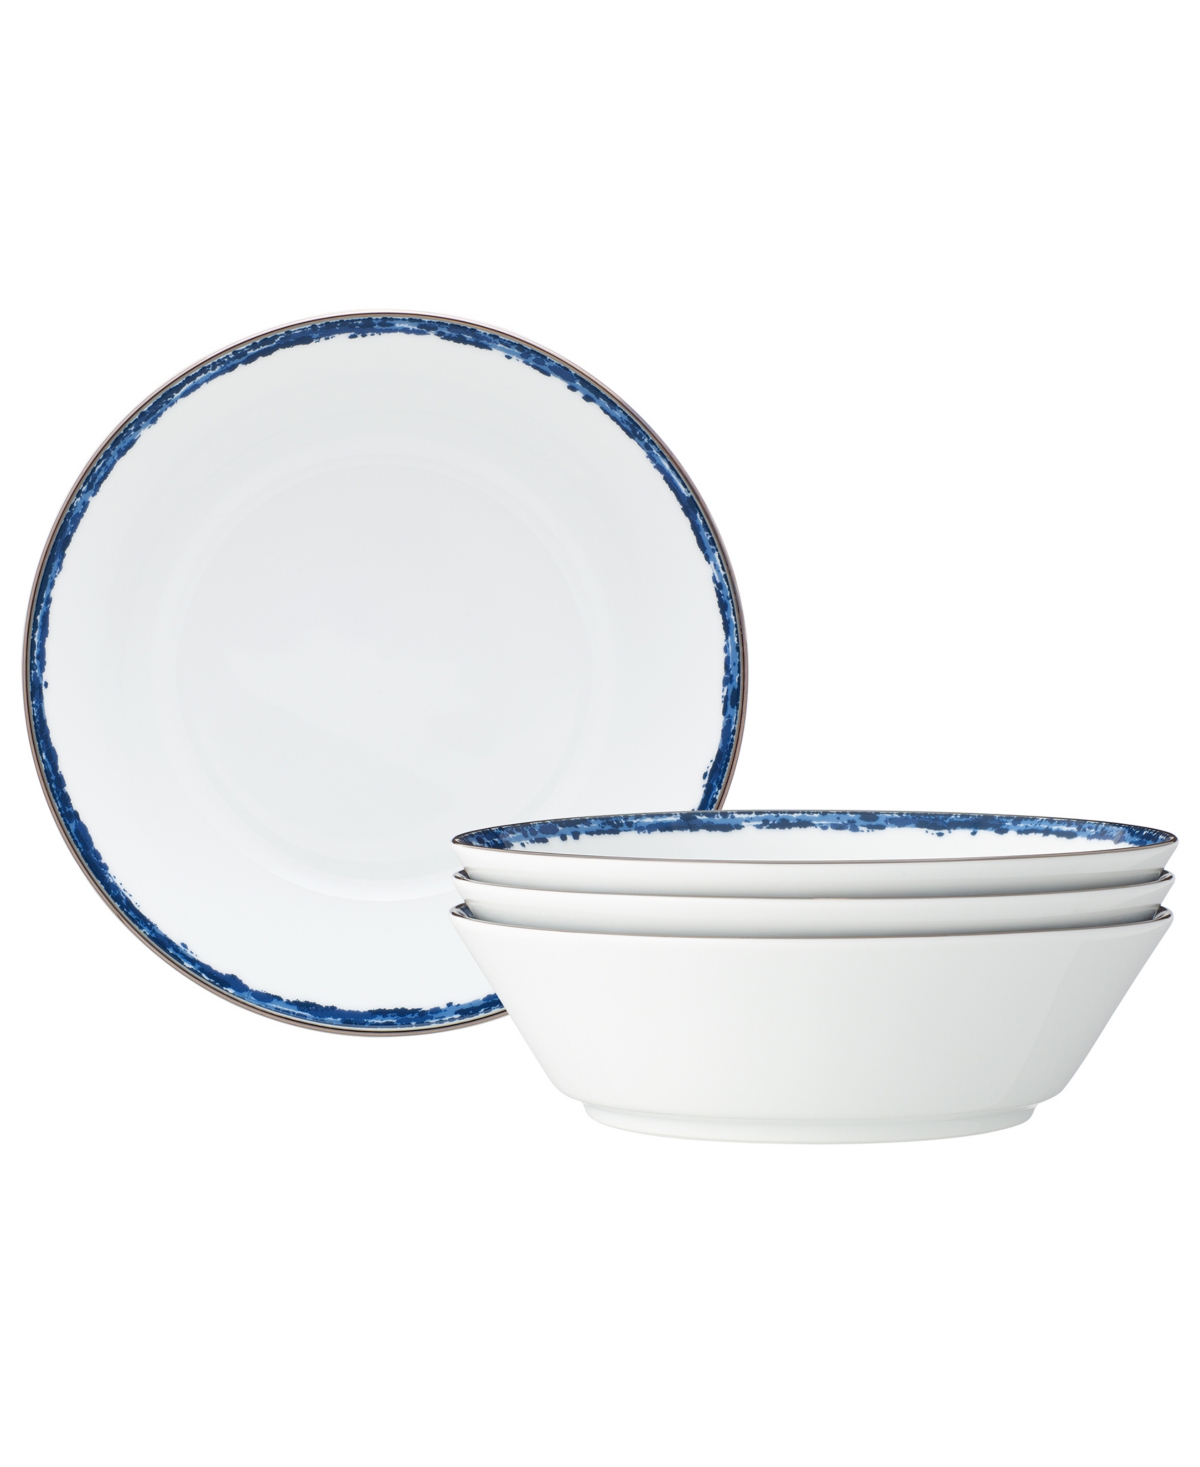 Noritake Rill 4 Piece Soup Bowl Set, Service For 4 In Blue